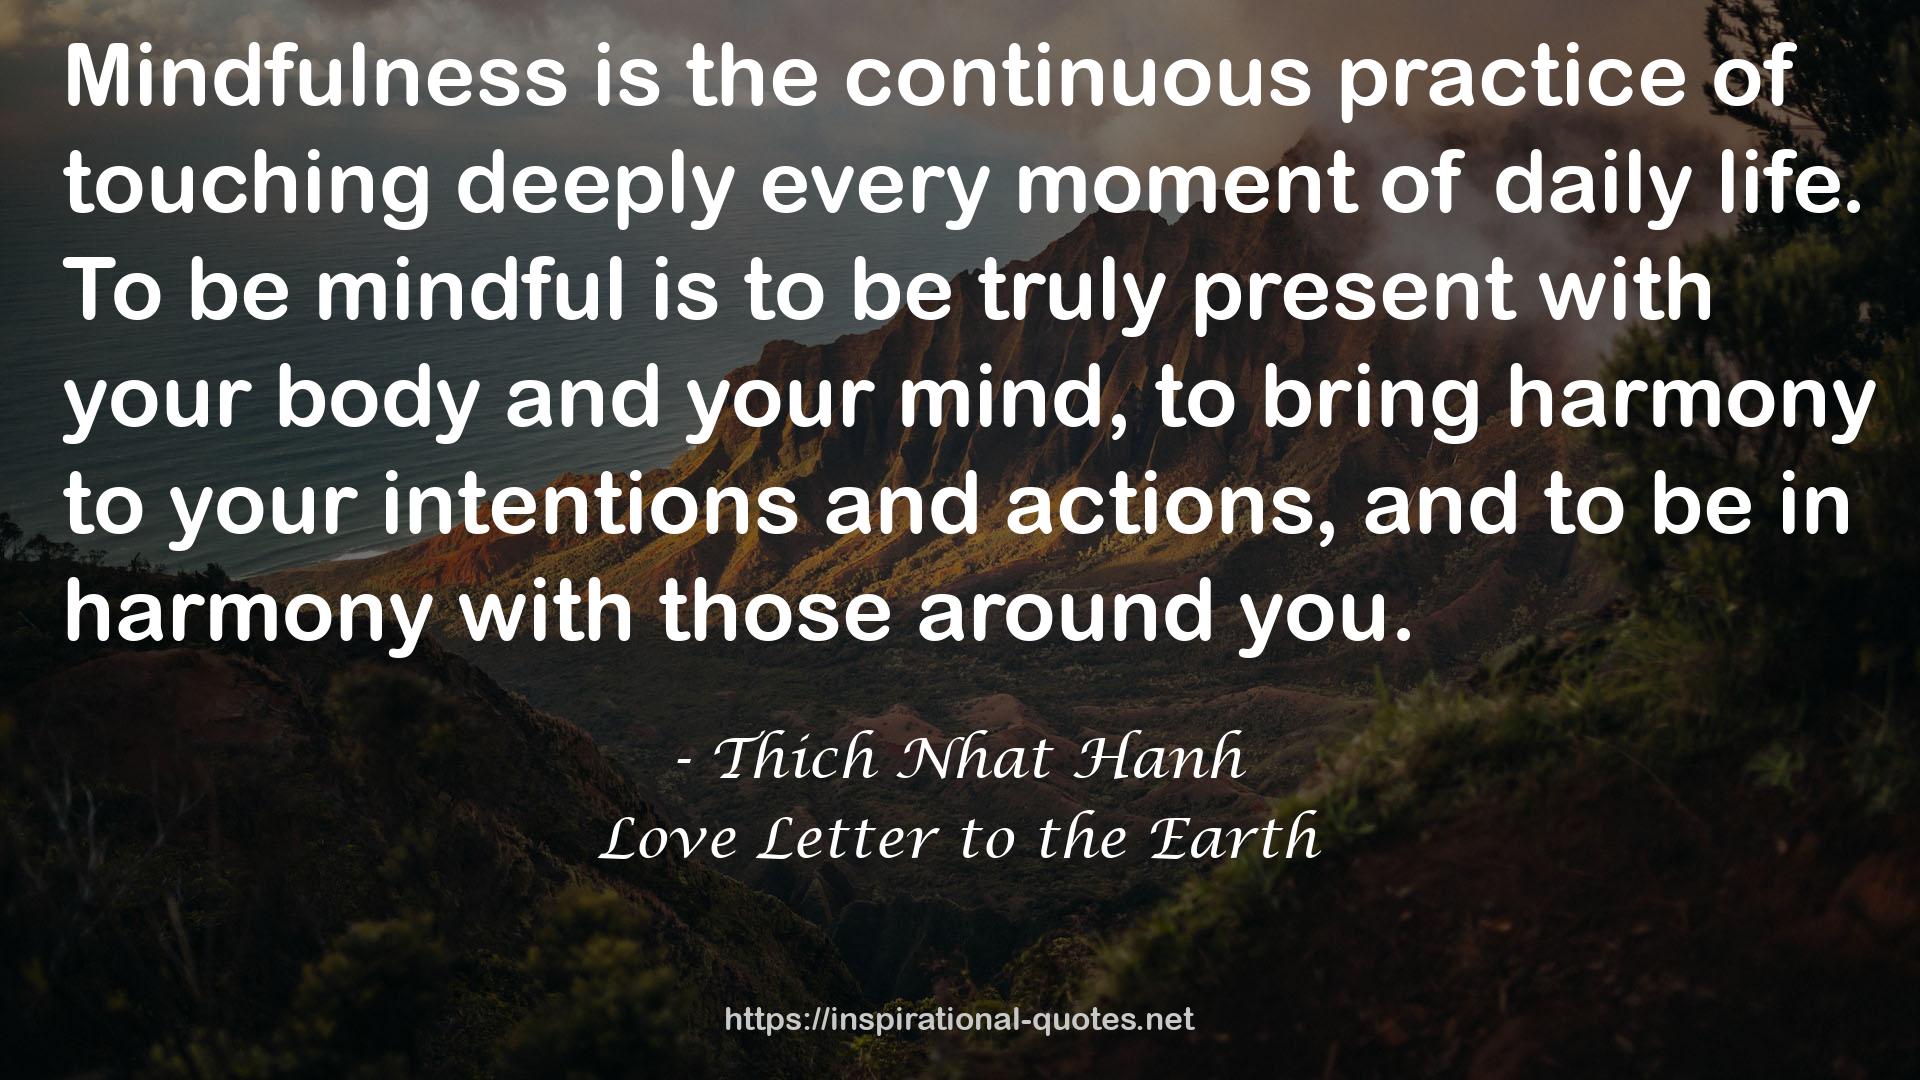 Love Letter to the Earth QUOTES